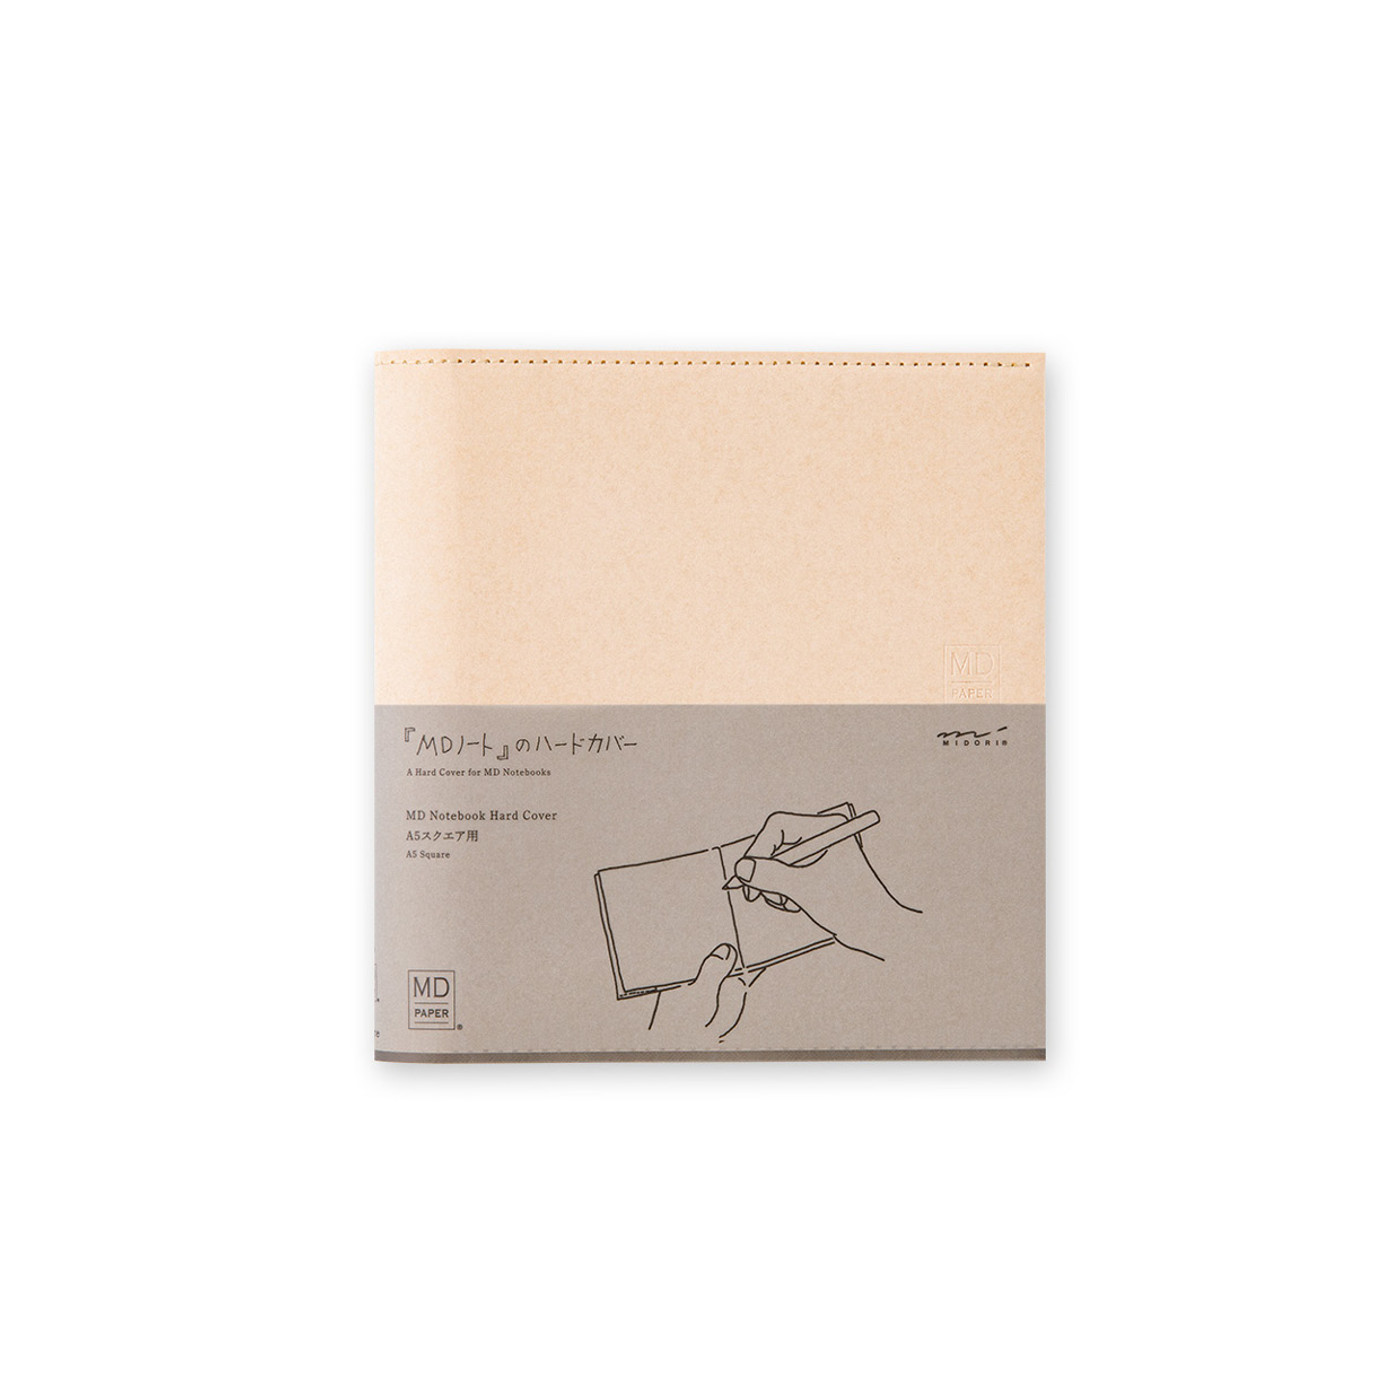 MD Paper notebook hard cover - PAPER - A5 square